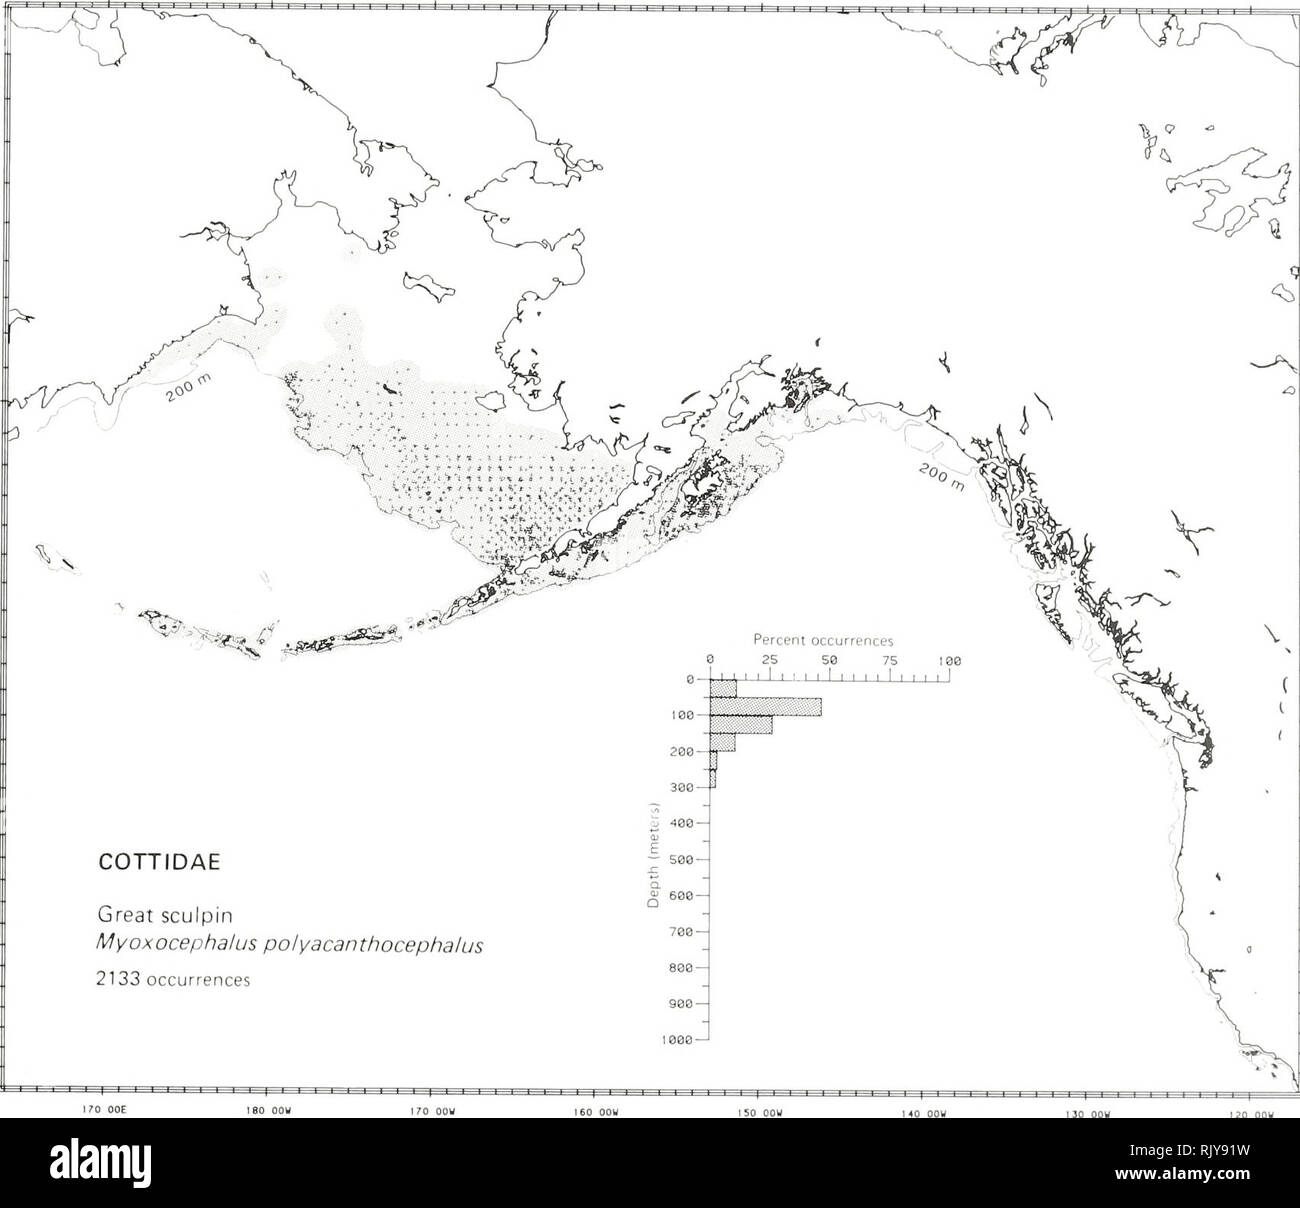 . Atlas and zoogeography of common fishes in the Bering Sea and Northeastern Pacific / M. James Allen, Gary B. Smith. Fishes Bering Sea Geographical distribution.. GREAT SCULPIN, Myoxocephalus polyacanthocephalus (Pallas [1814]) Cottidae: Sculpins Literature Reported from the eastern Sea of Japan to the Commander Islands (but not in the Sea of Okhotsk), east along the Aleutians, north in the Bering Sea to the Pribilof Islands, and southeast to Puget Sound, Washington (Wilimovsky 1964; Quast and Hall 1972; Eschmeyer and Herald 1983), at depths of 0 to 320 m (Neelov 1979). Survey data Found from Stock Photo